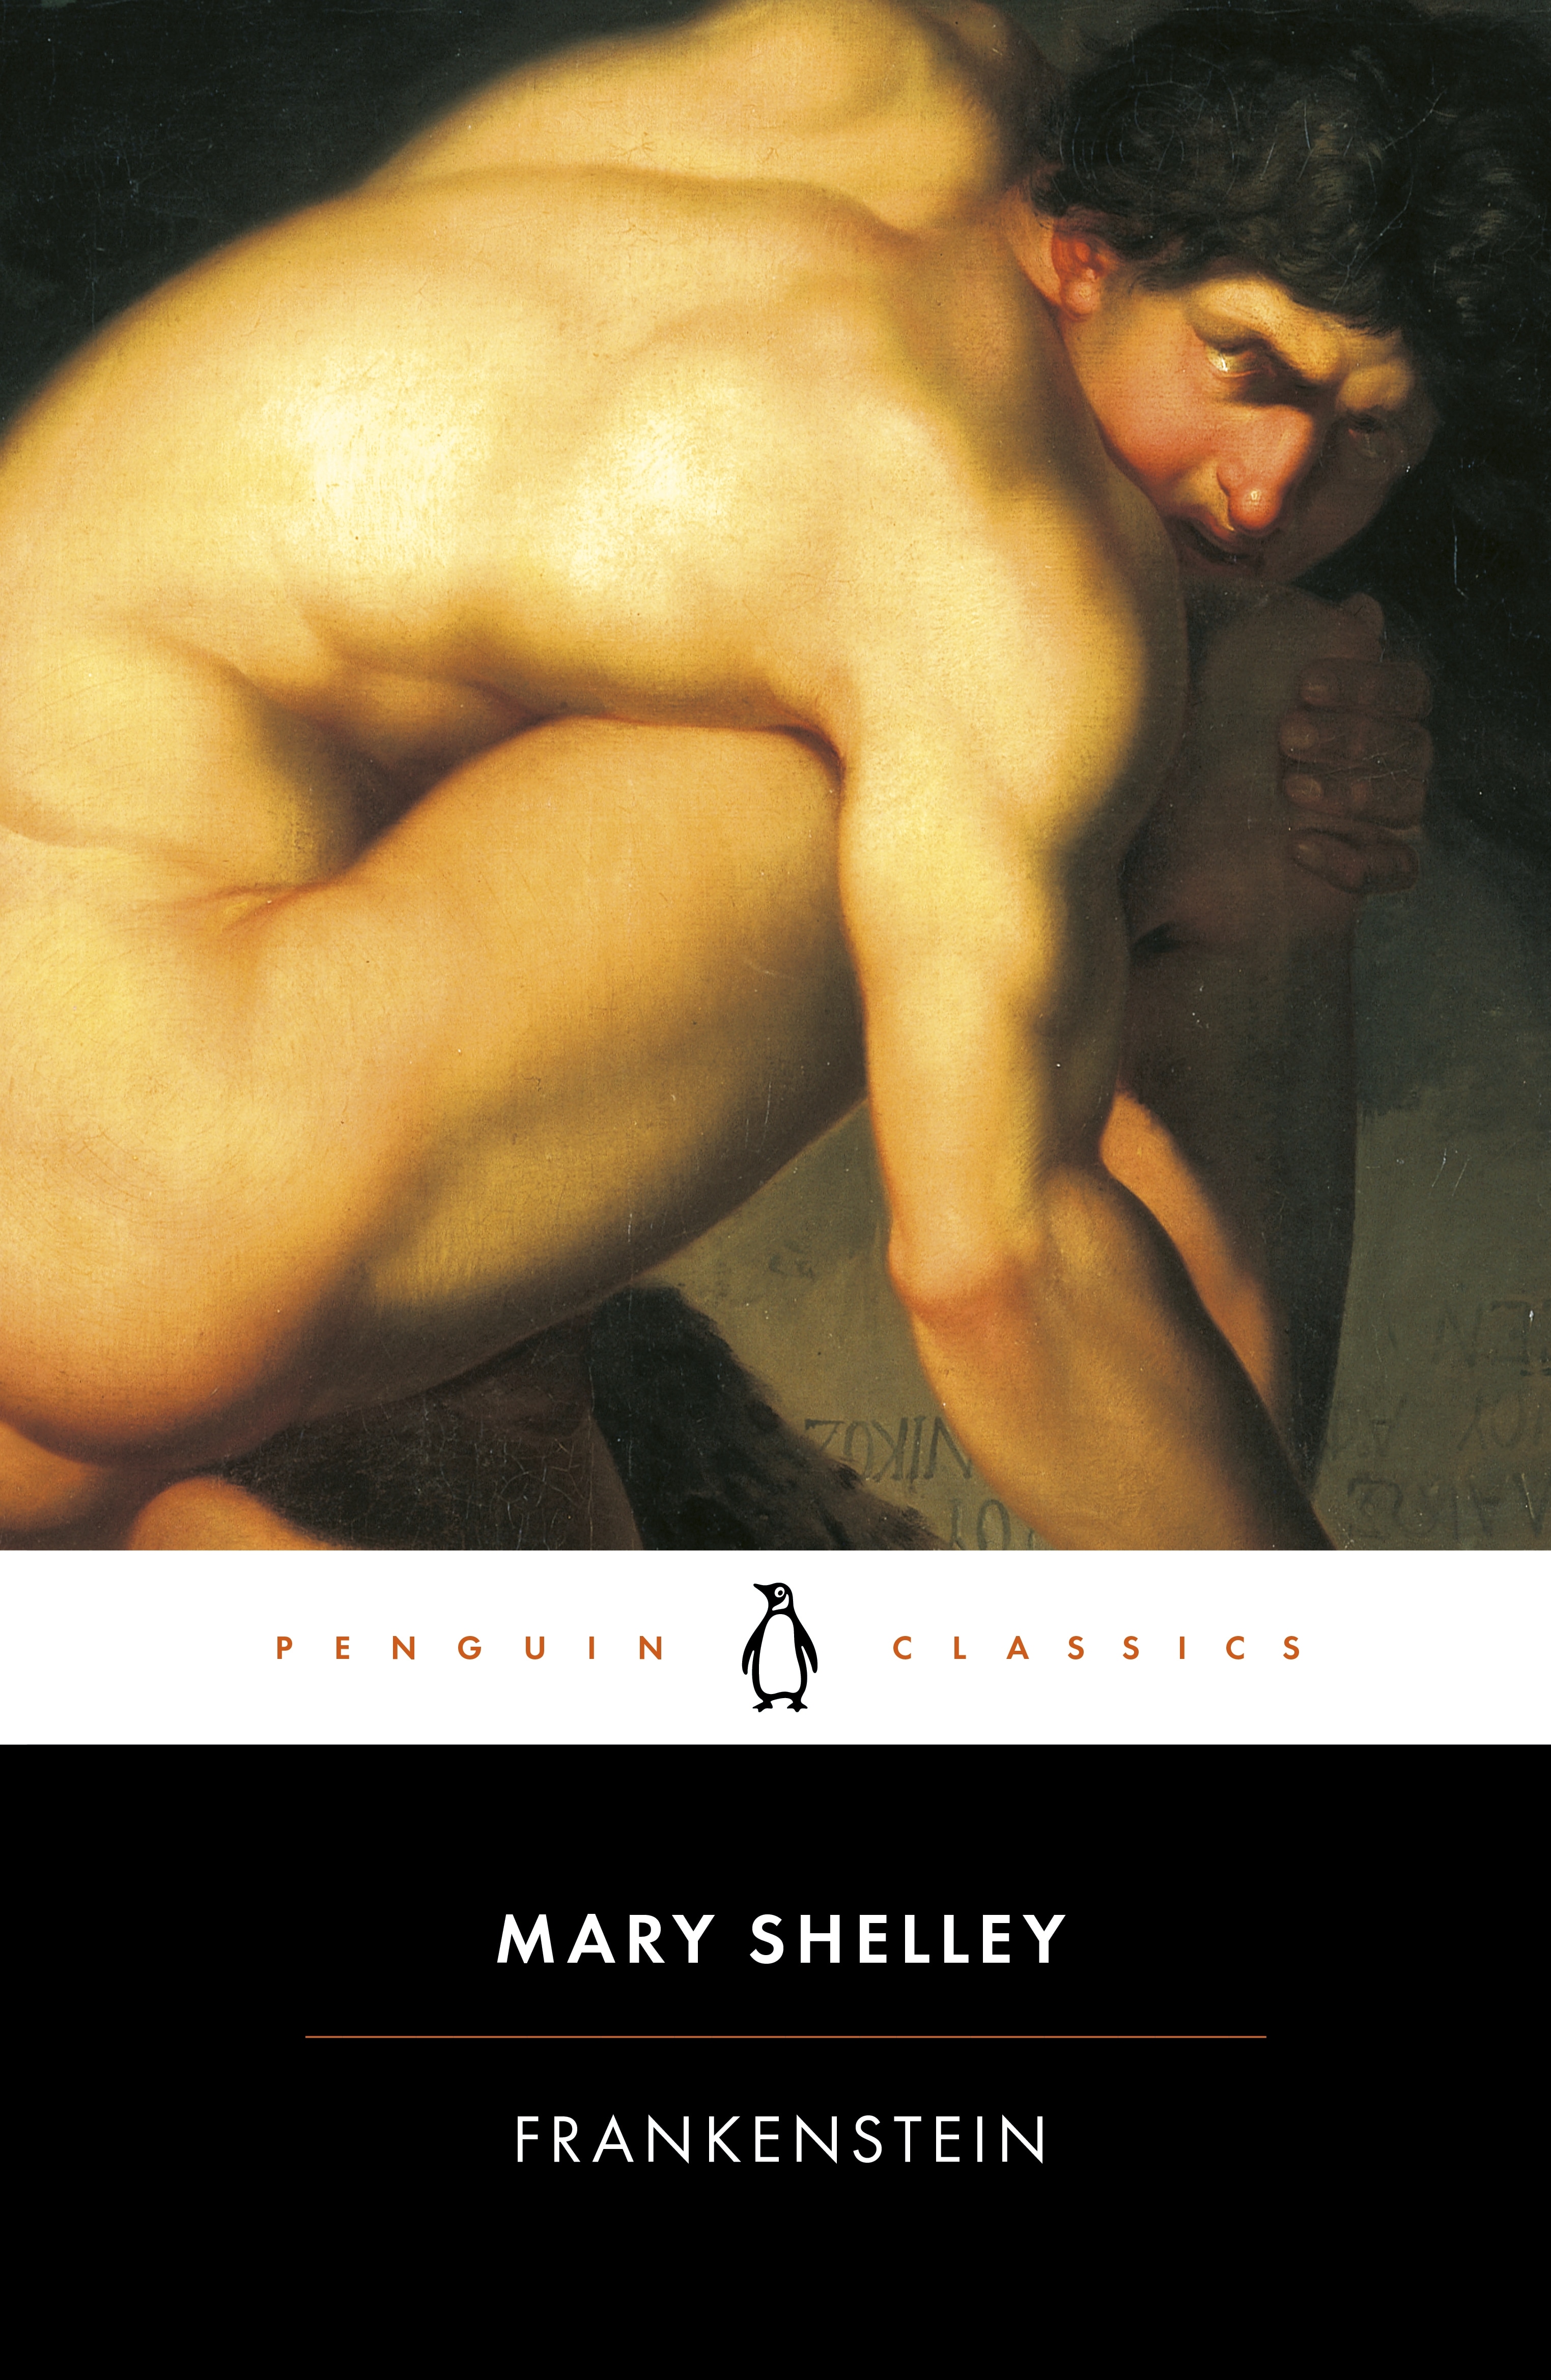 Book “Frankenstein” by Mary Shelley, Maurice Hindle — January 30, 2003